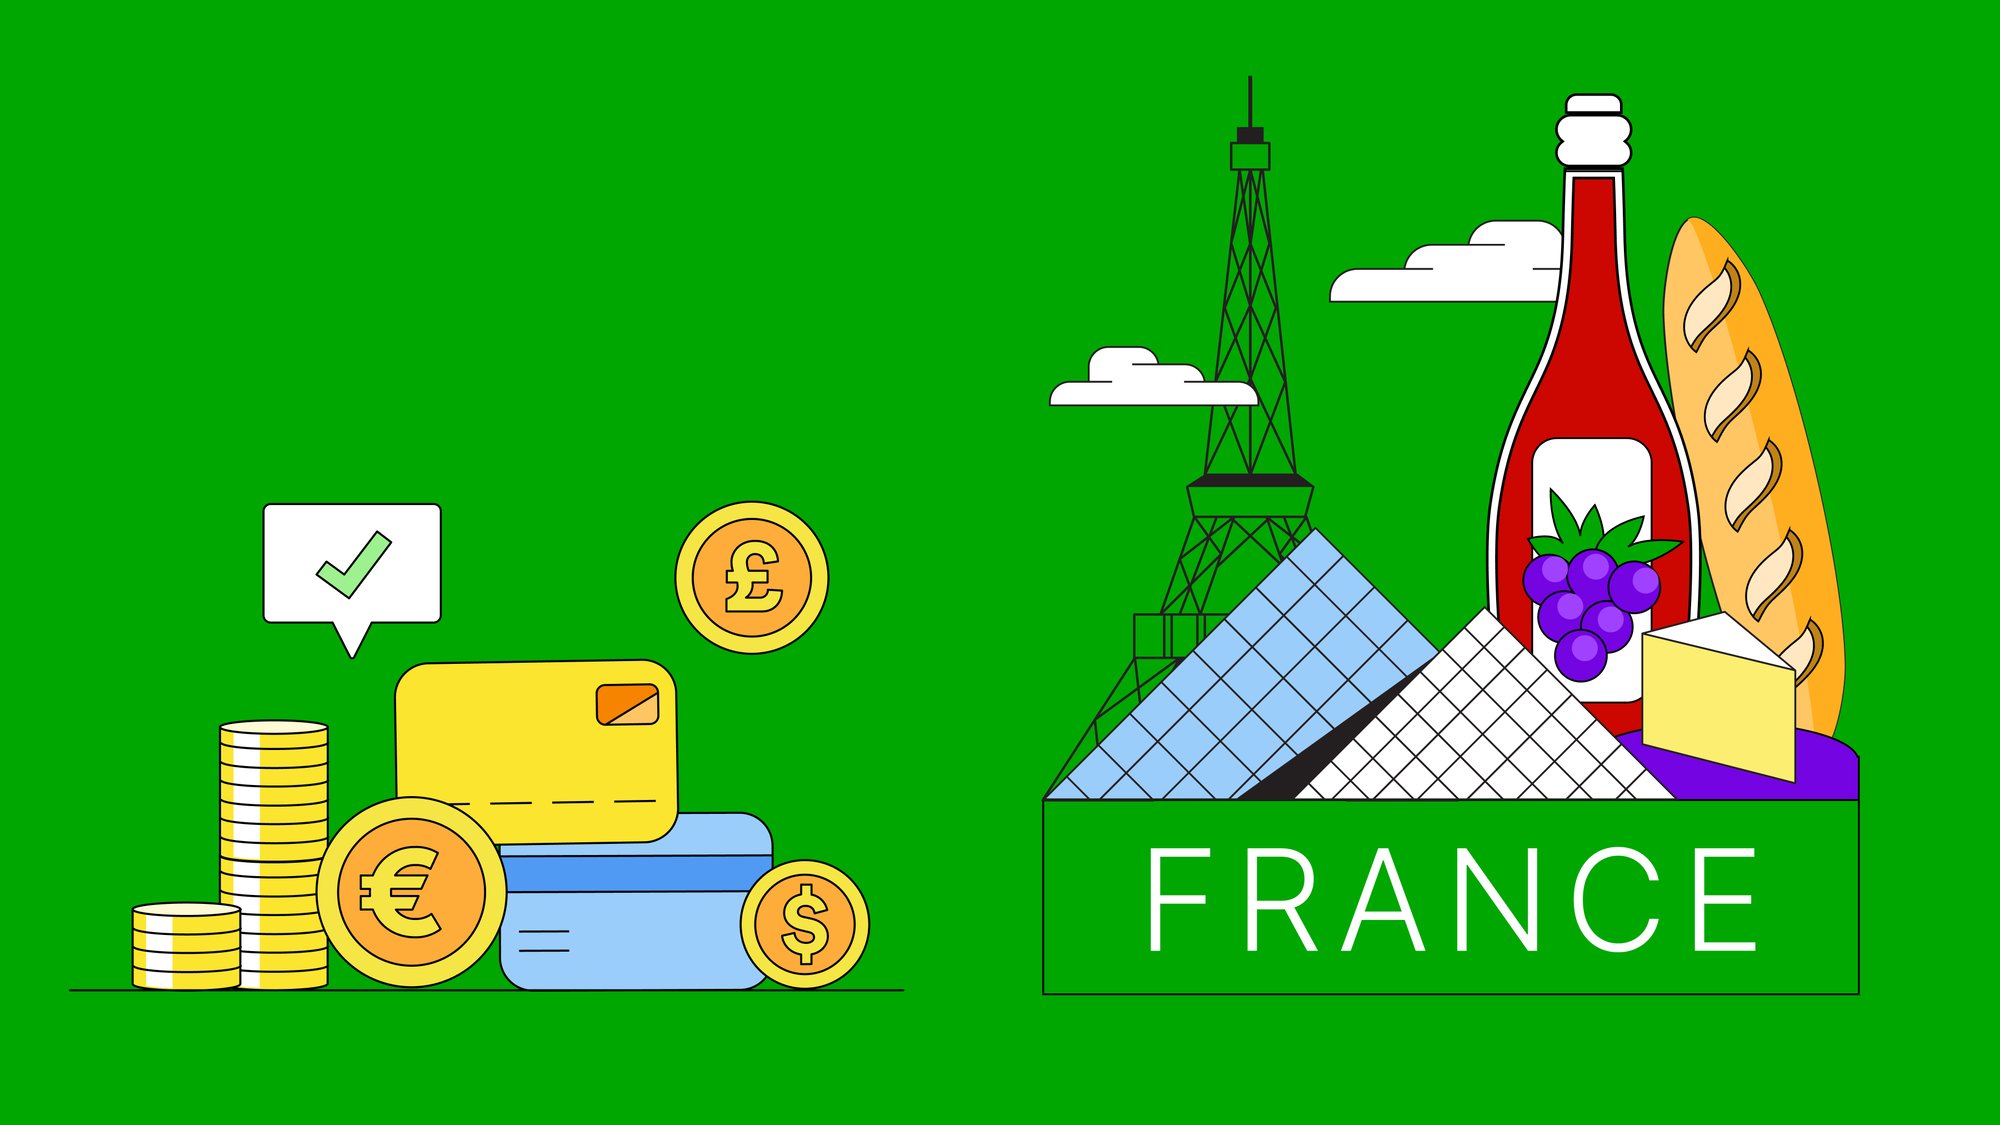 How to Open a French Bank Account as an American in France